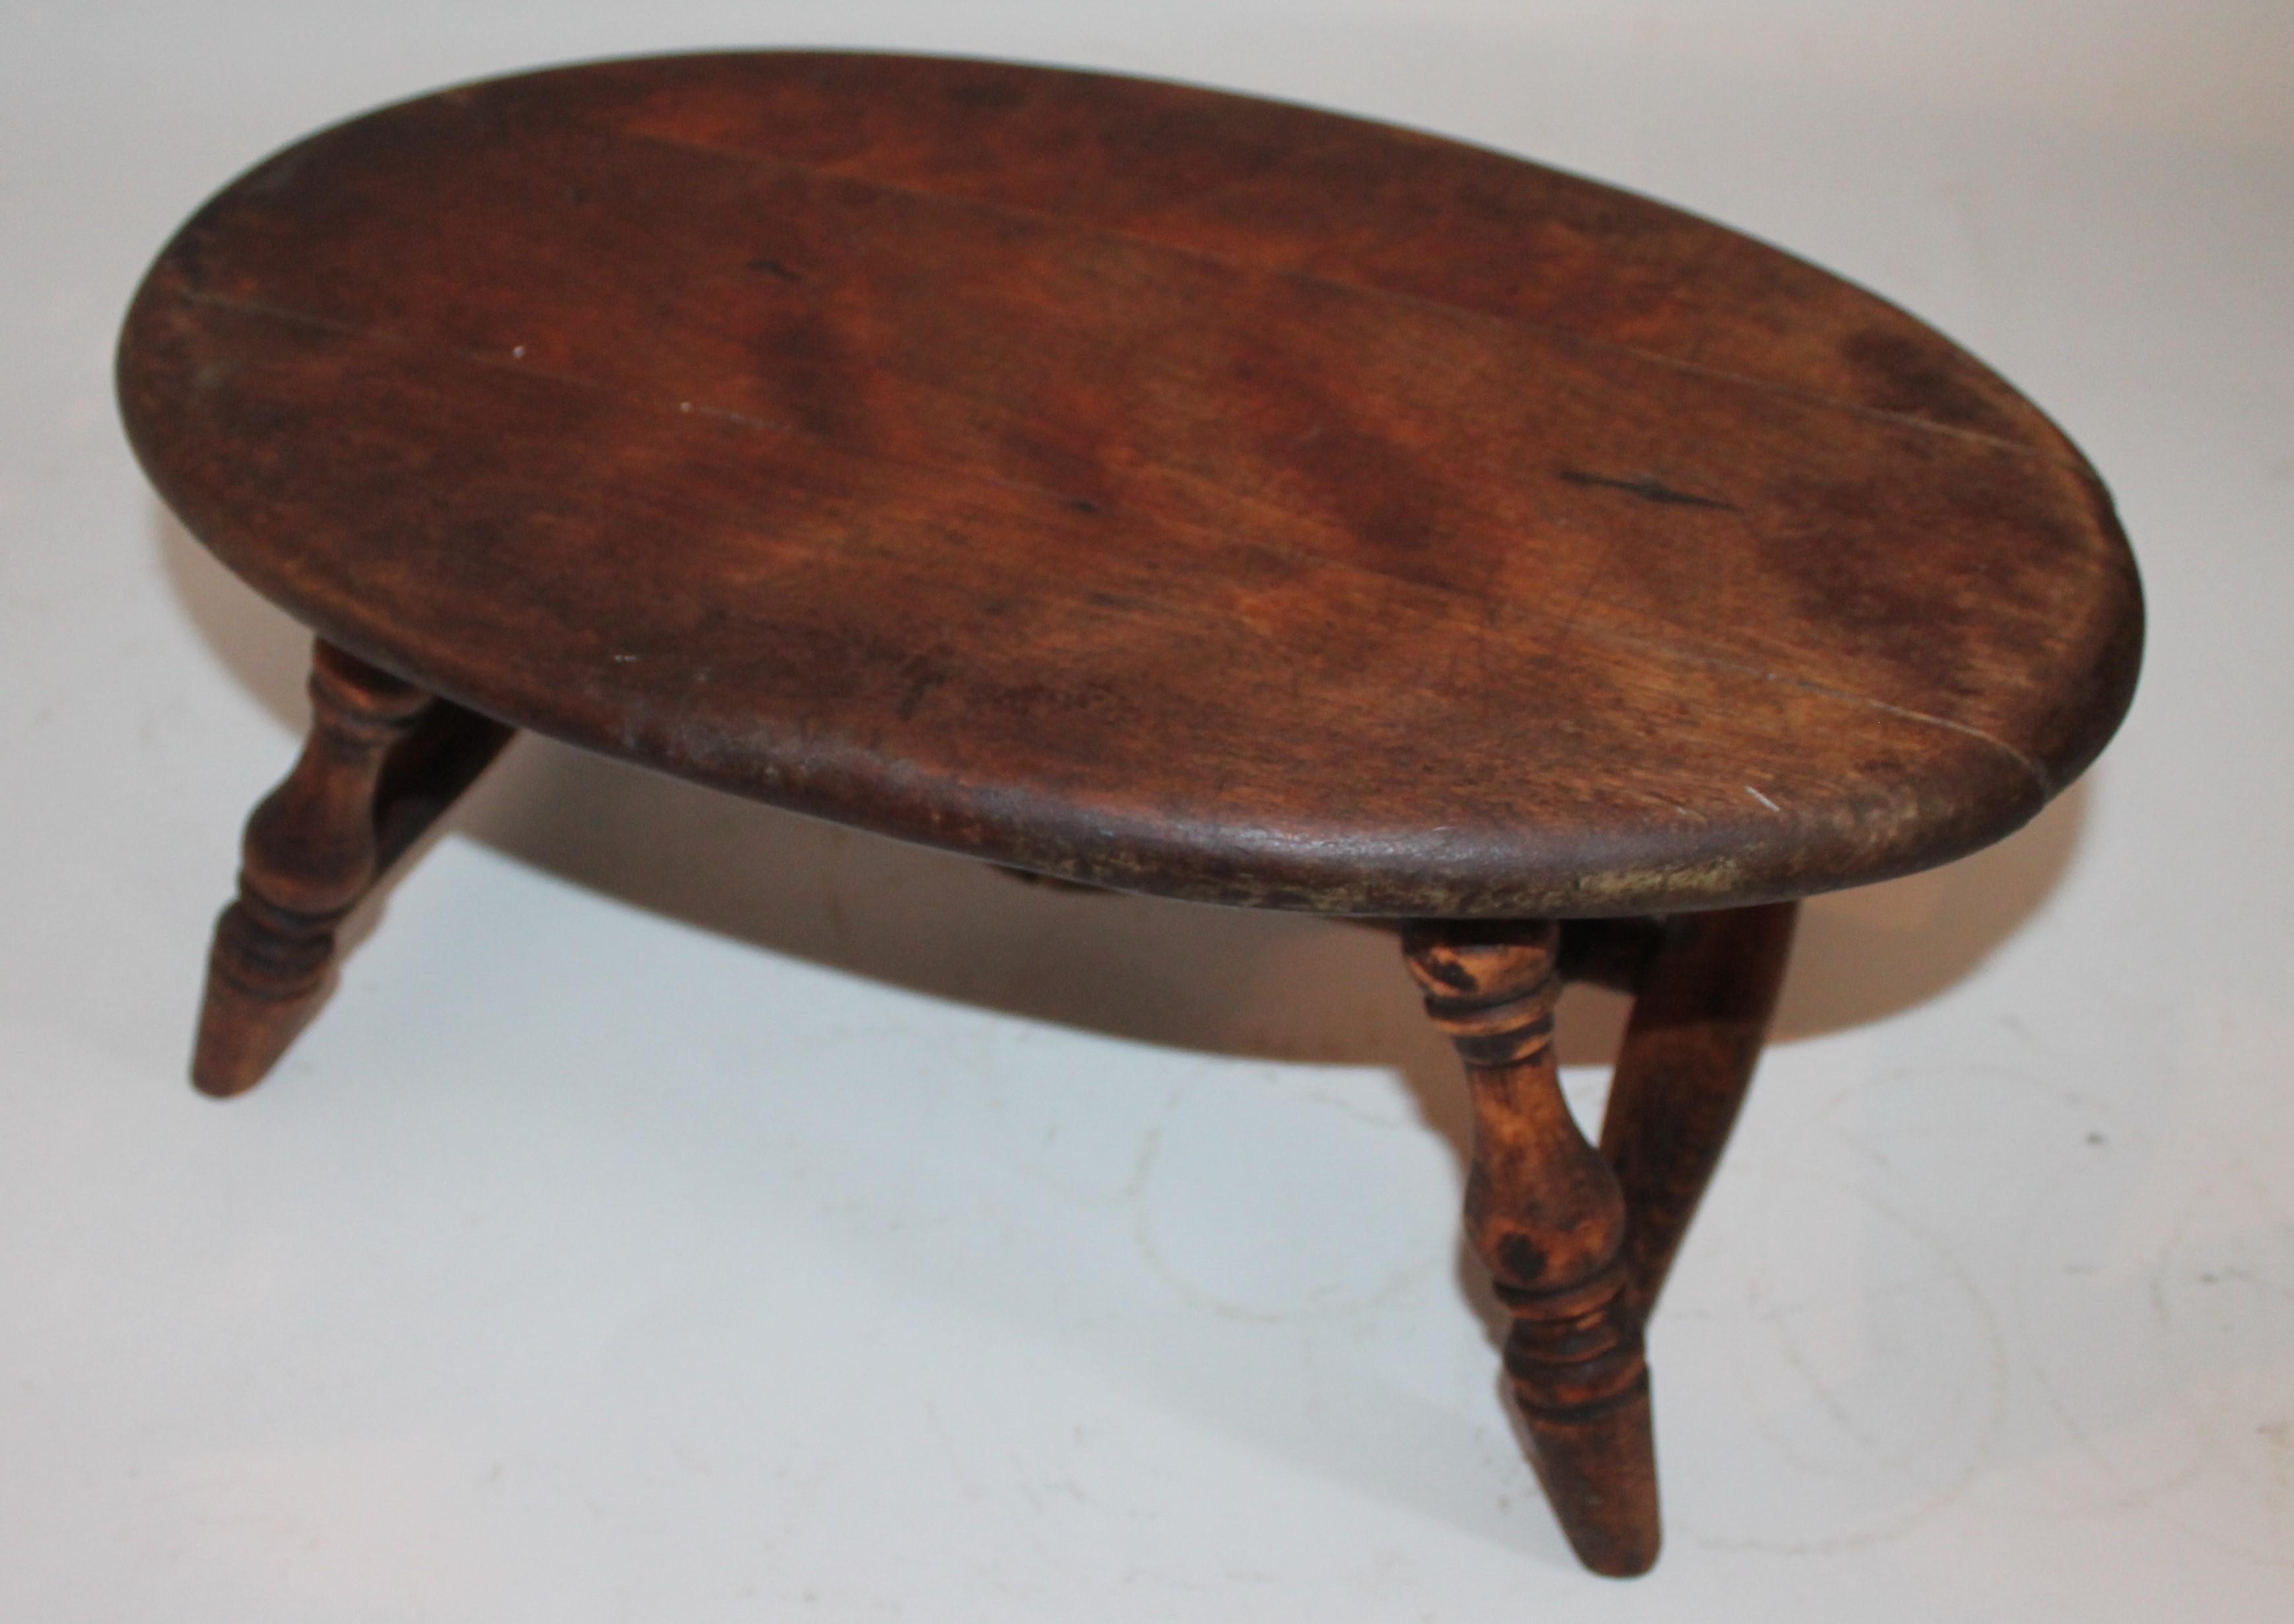 Adirondack 19th Century Oval Hitchcock Foot Stool from New England